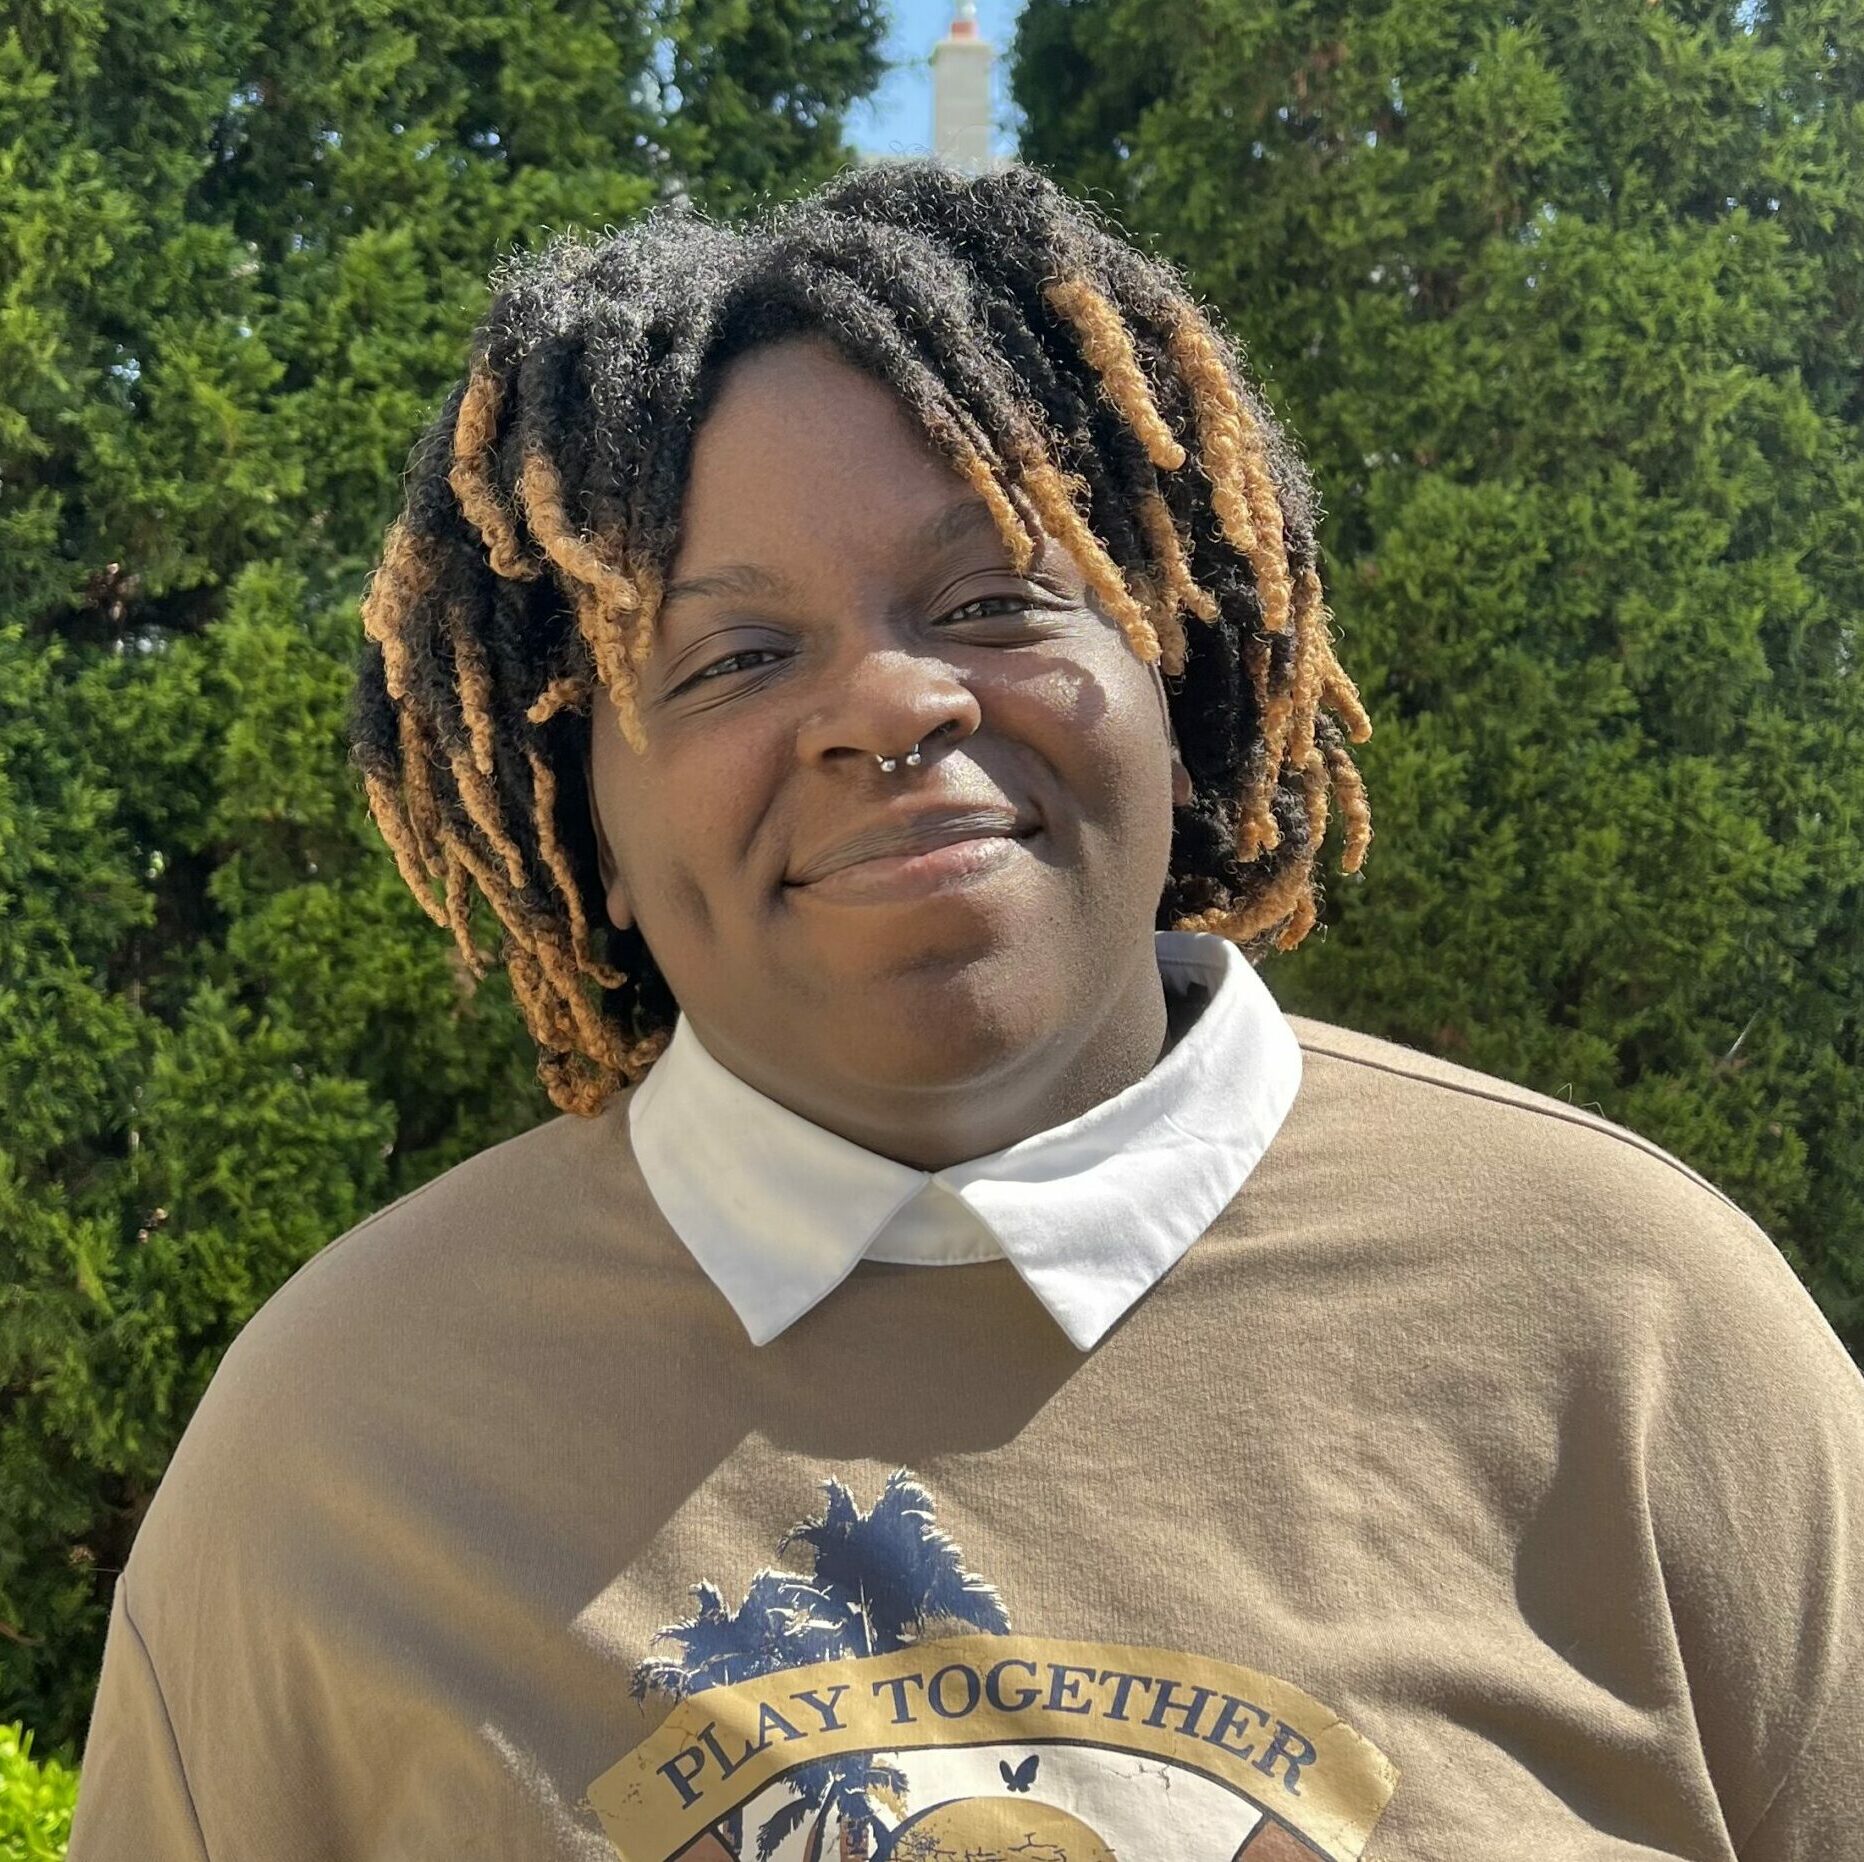 A person with dark skin and face-framing locs smiles. They are wearing a brown sweatshirt, and white collared shirt. There are trees in the background.